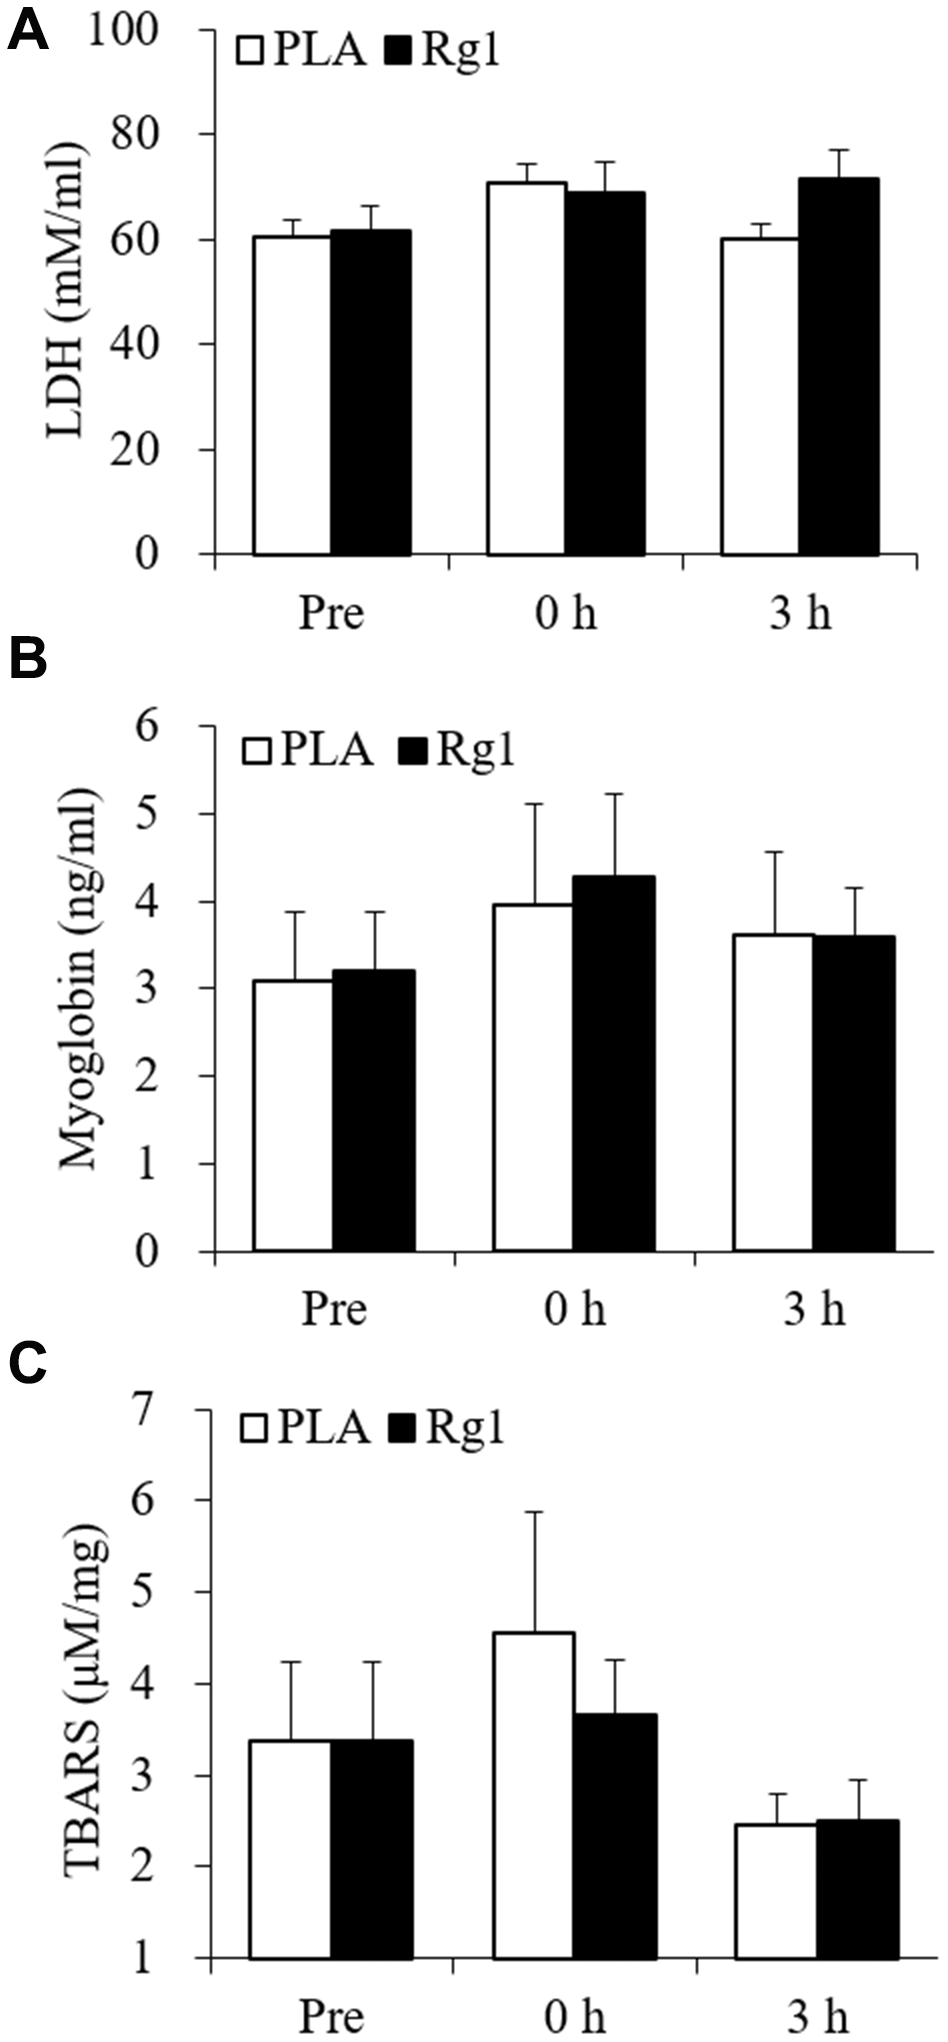 Plasma muscle damage markers unaltered following aerobic exercise. Lactate dehydrogenase (A), myoglobin (B), and TBARS (C) were not significantly increased after 1-h cycling exercise (70% V̇O2max). Data are expressed as mean and SEM. Abbreviation: TBARS, Thiobarbituric acid reactive substances.